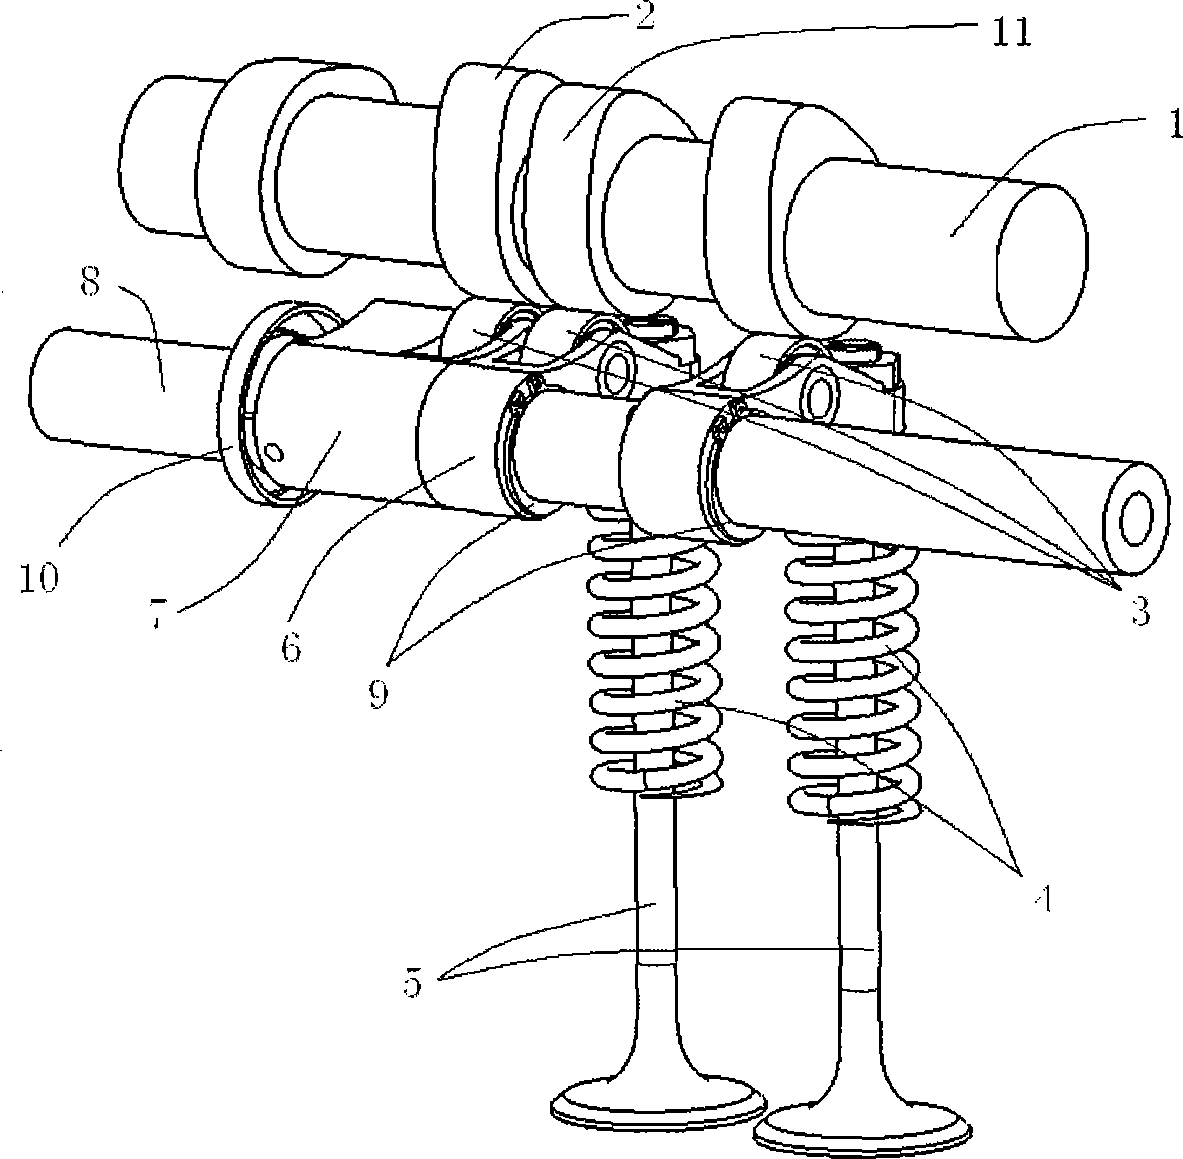 Variable air valve stroke mechanism of car engine and its control method